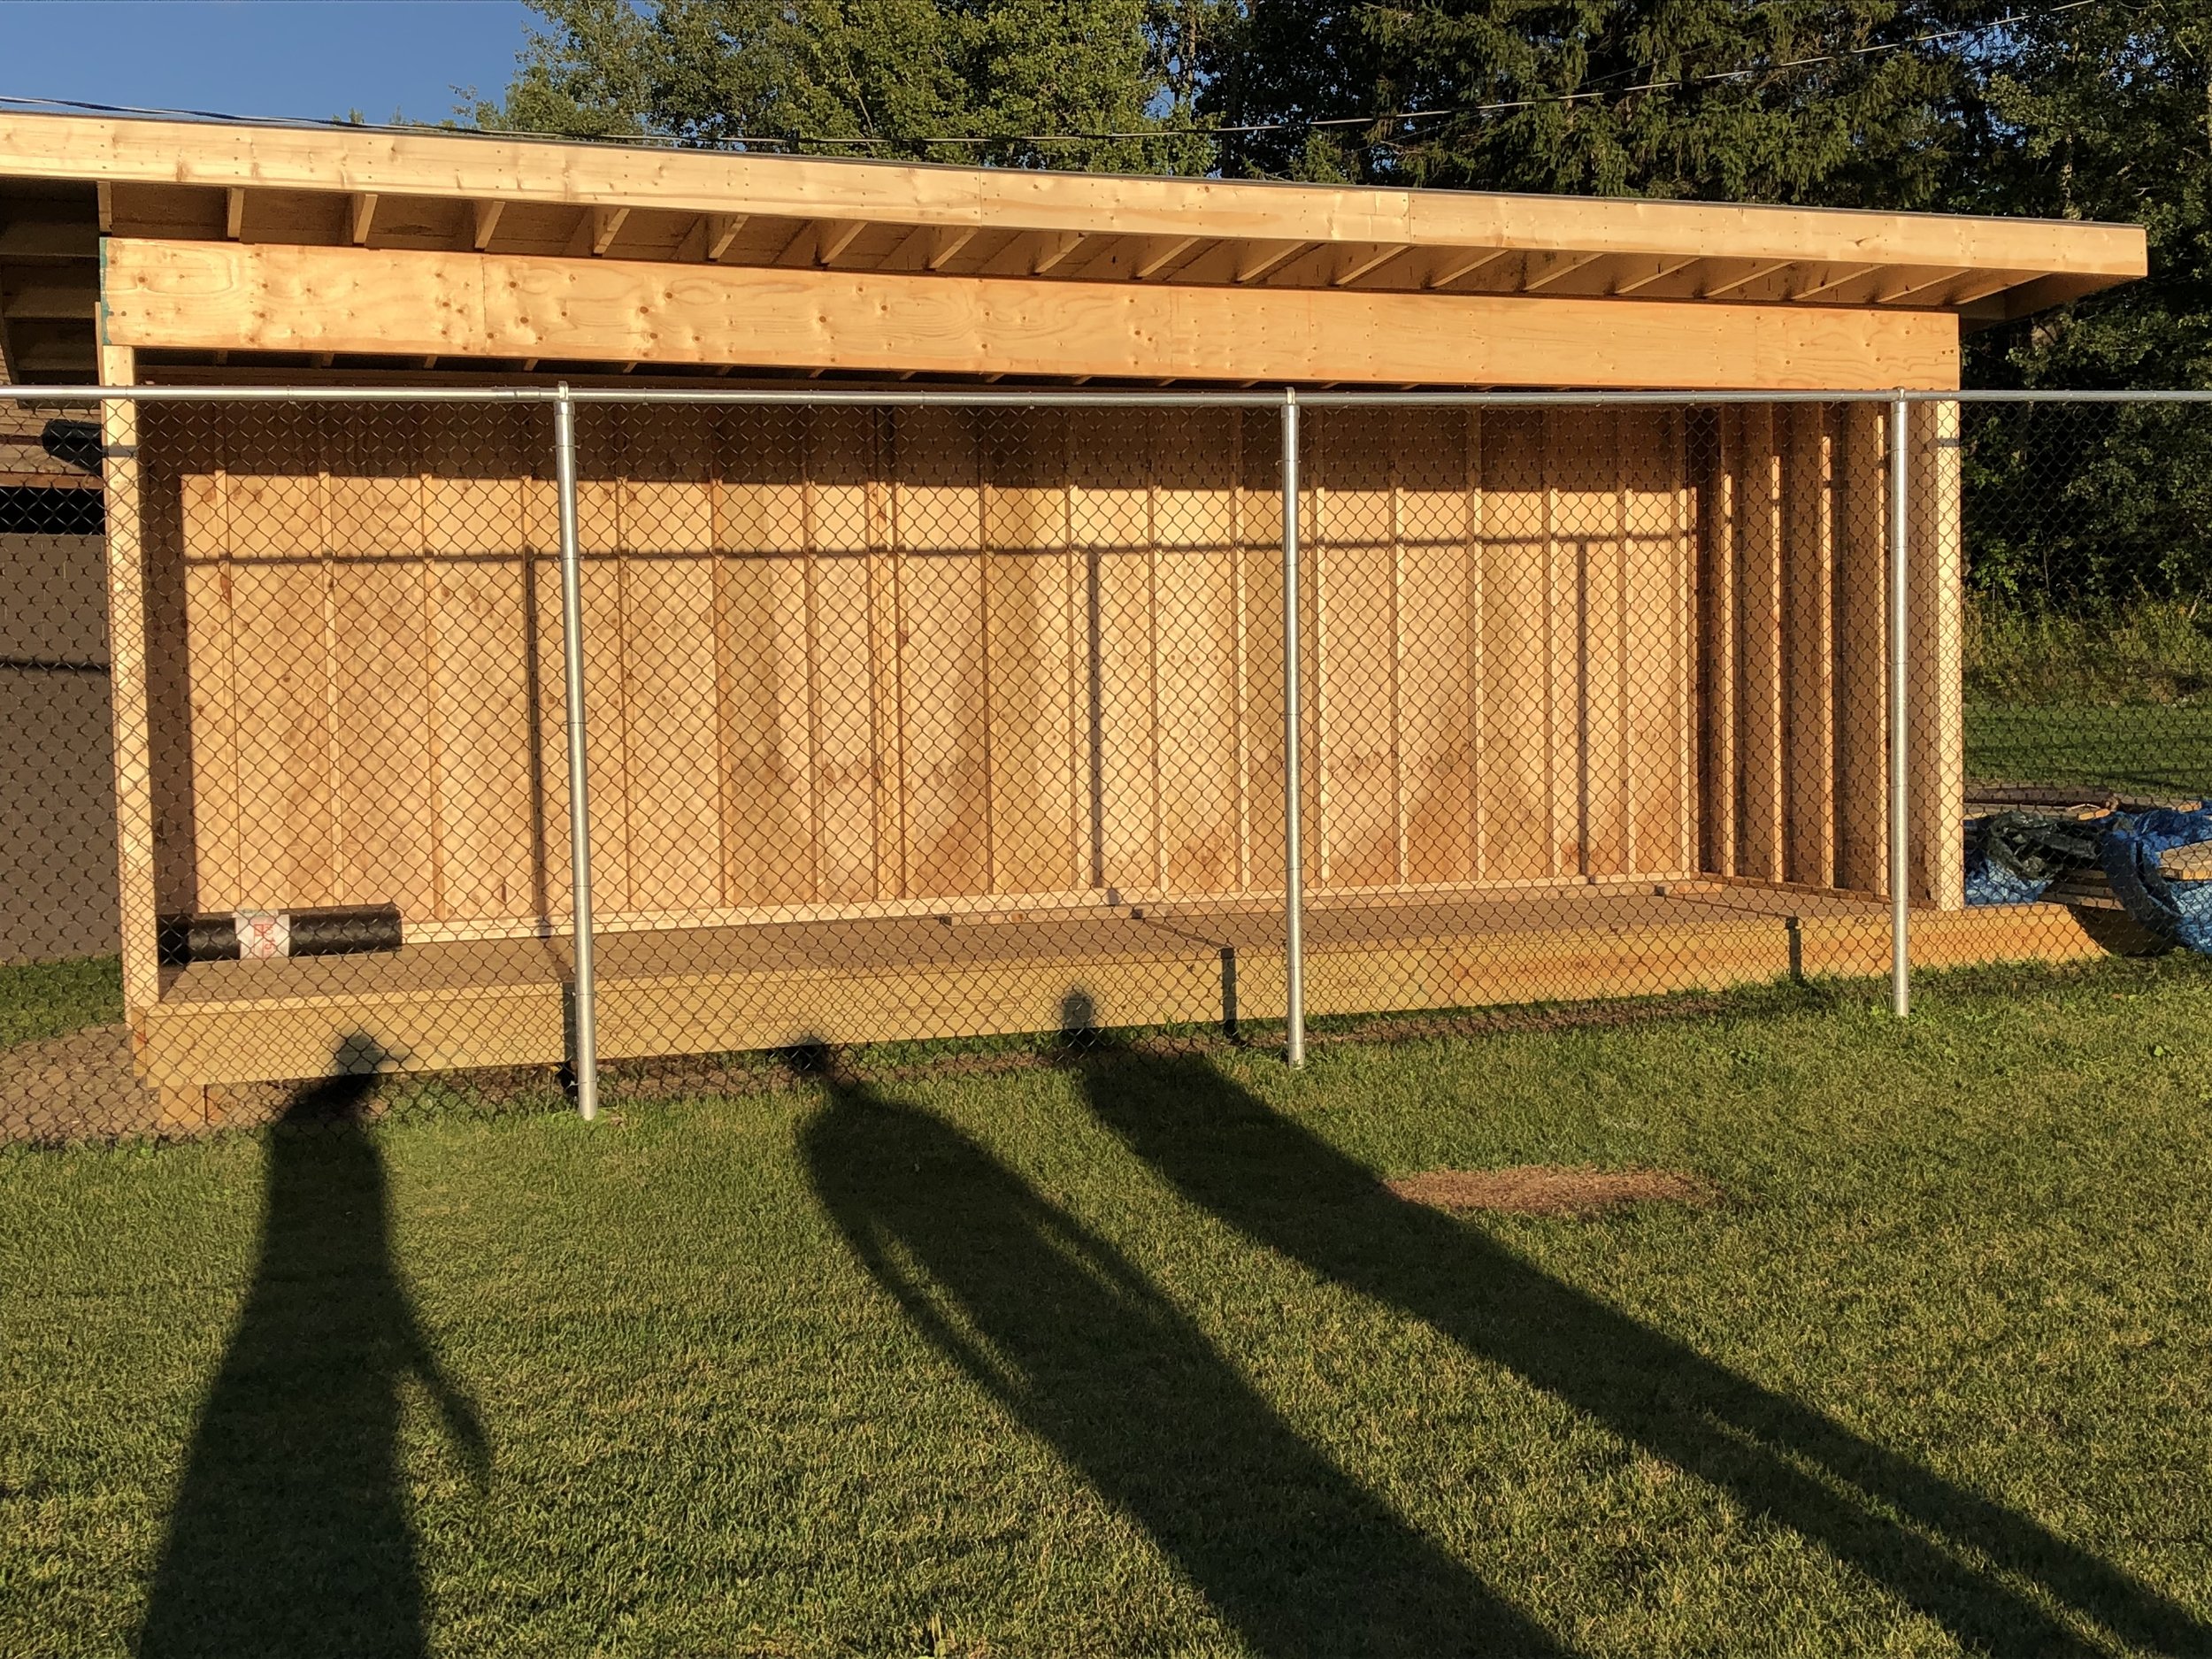   You are looking a brand new above-ground dug-out that volunteers of the Tupper Lake Youth Baseball and Softball Association erected in one day Saturday behind the backstop fence at the new Little League diamond in the Tupper Lake Municipal Park.  